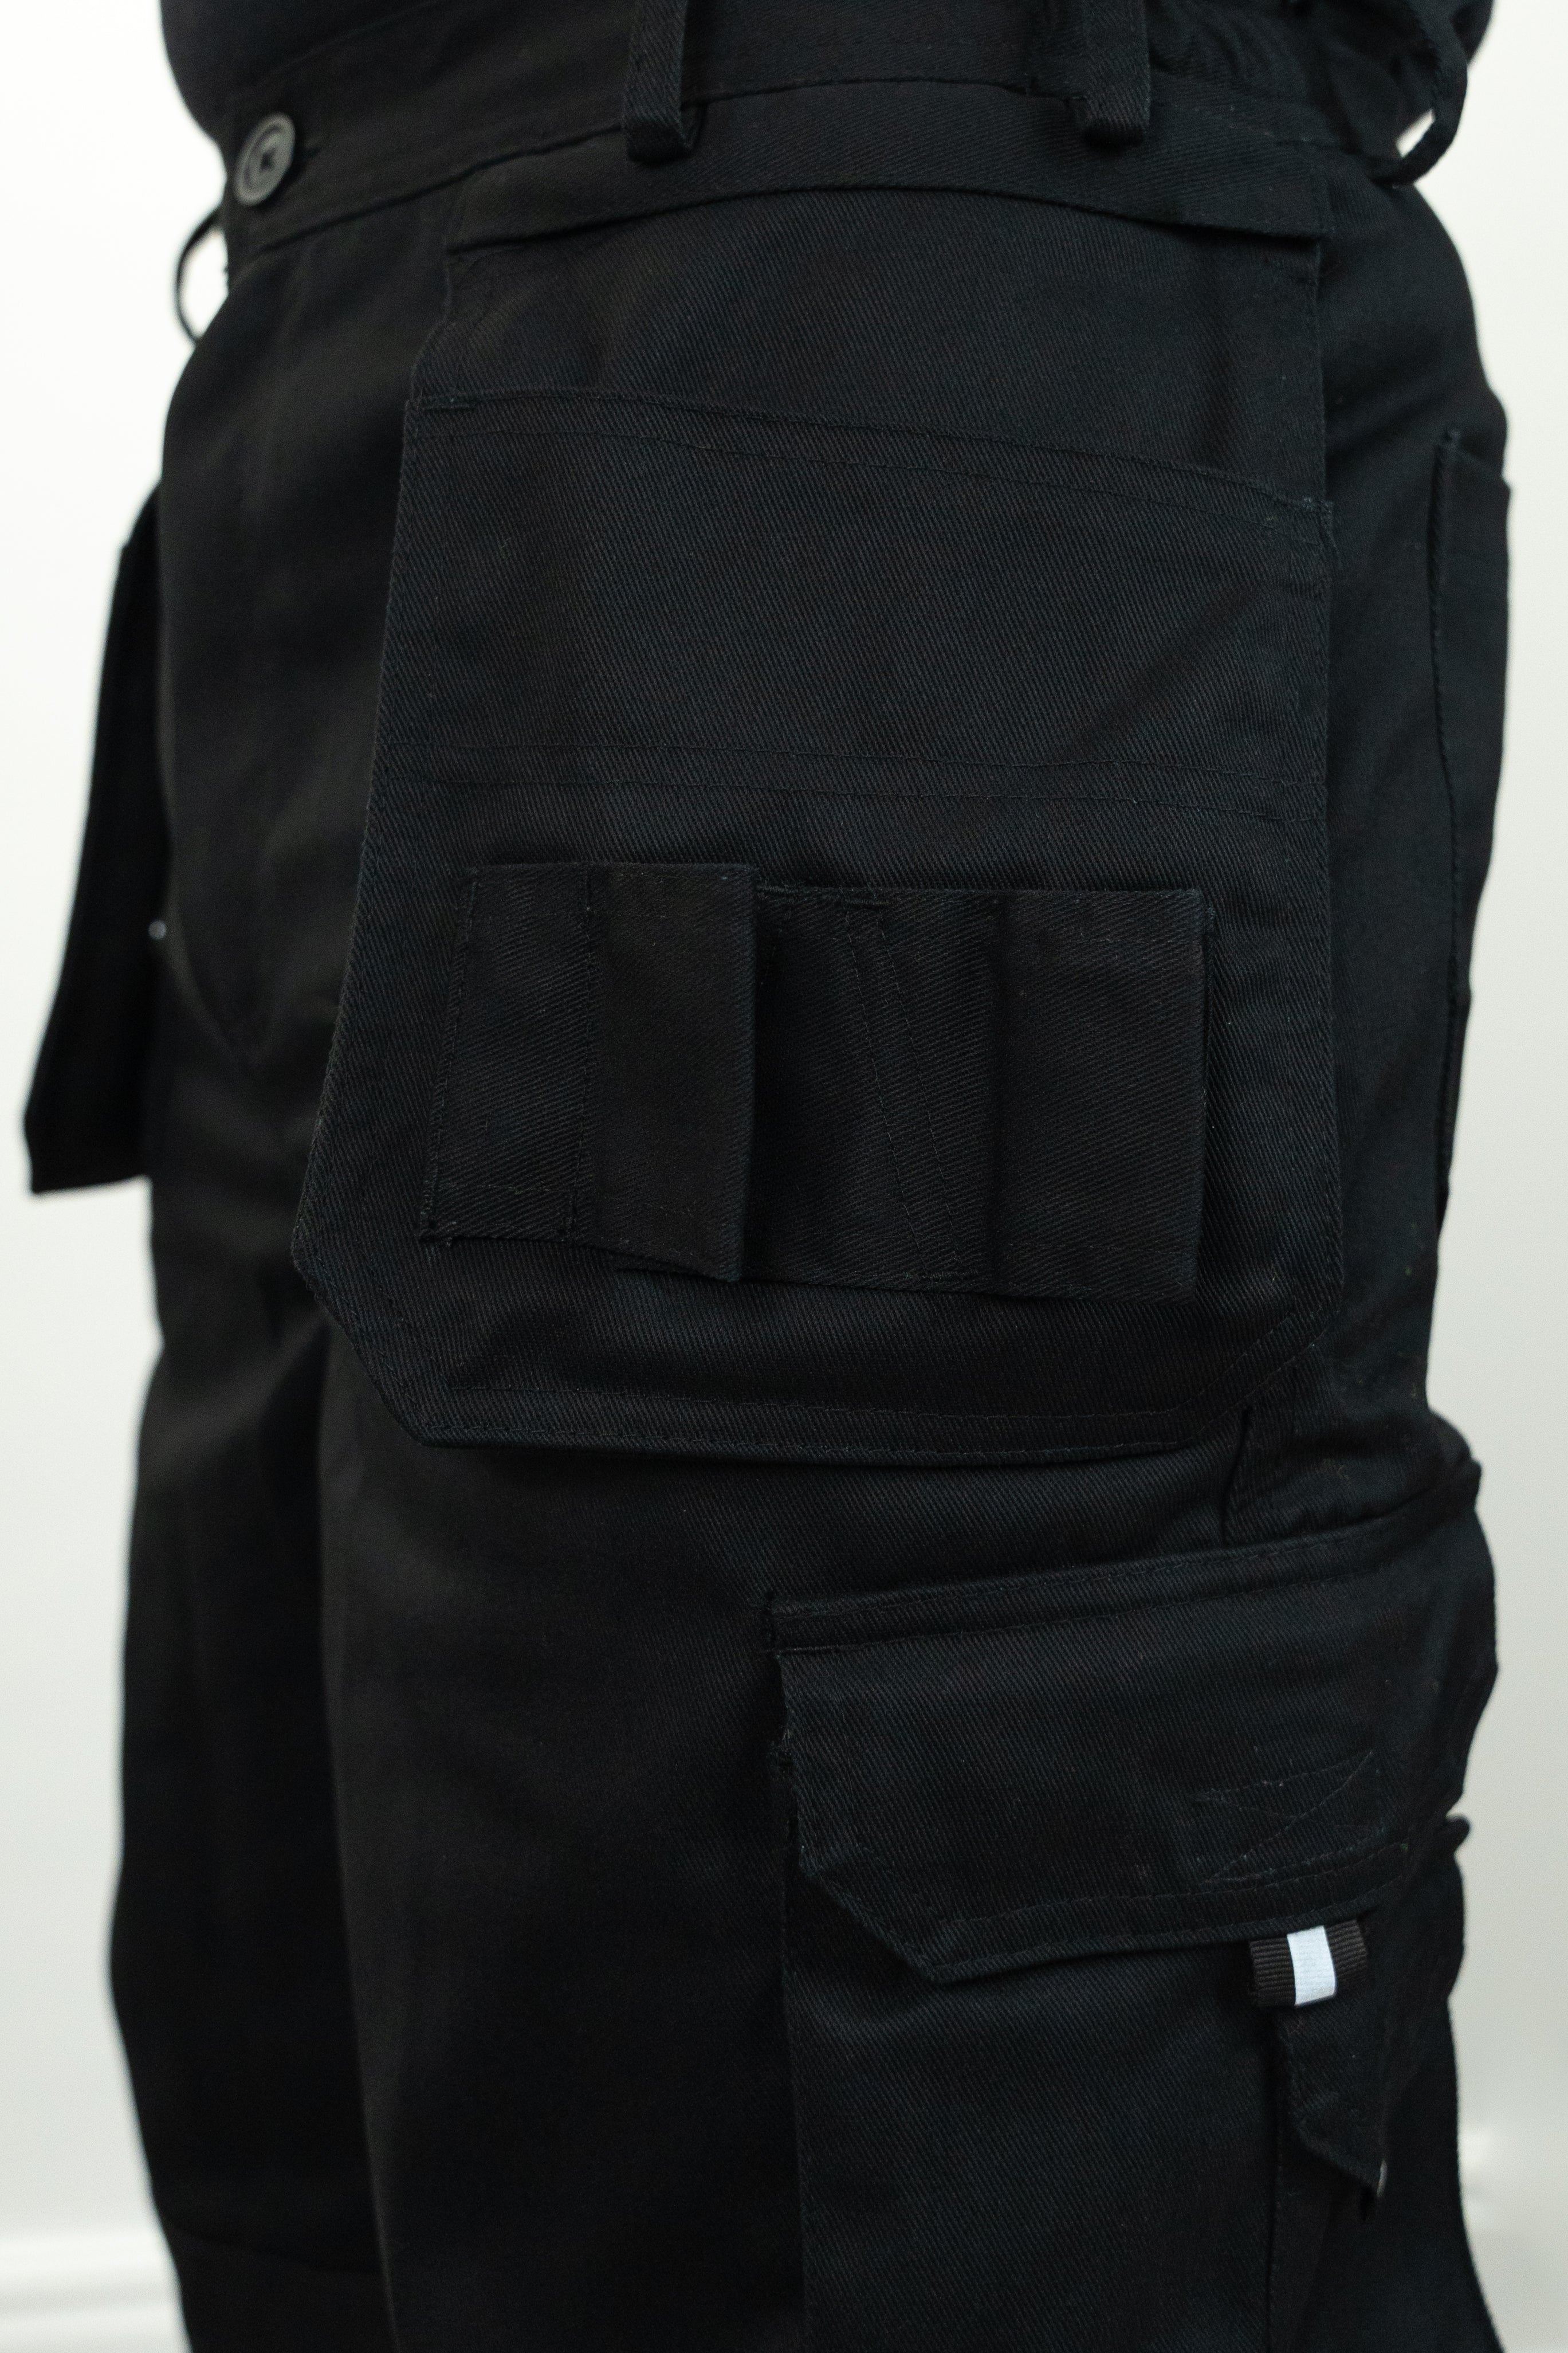 close up of detachable side pocket with tool holding attributes